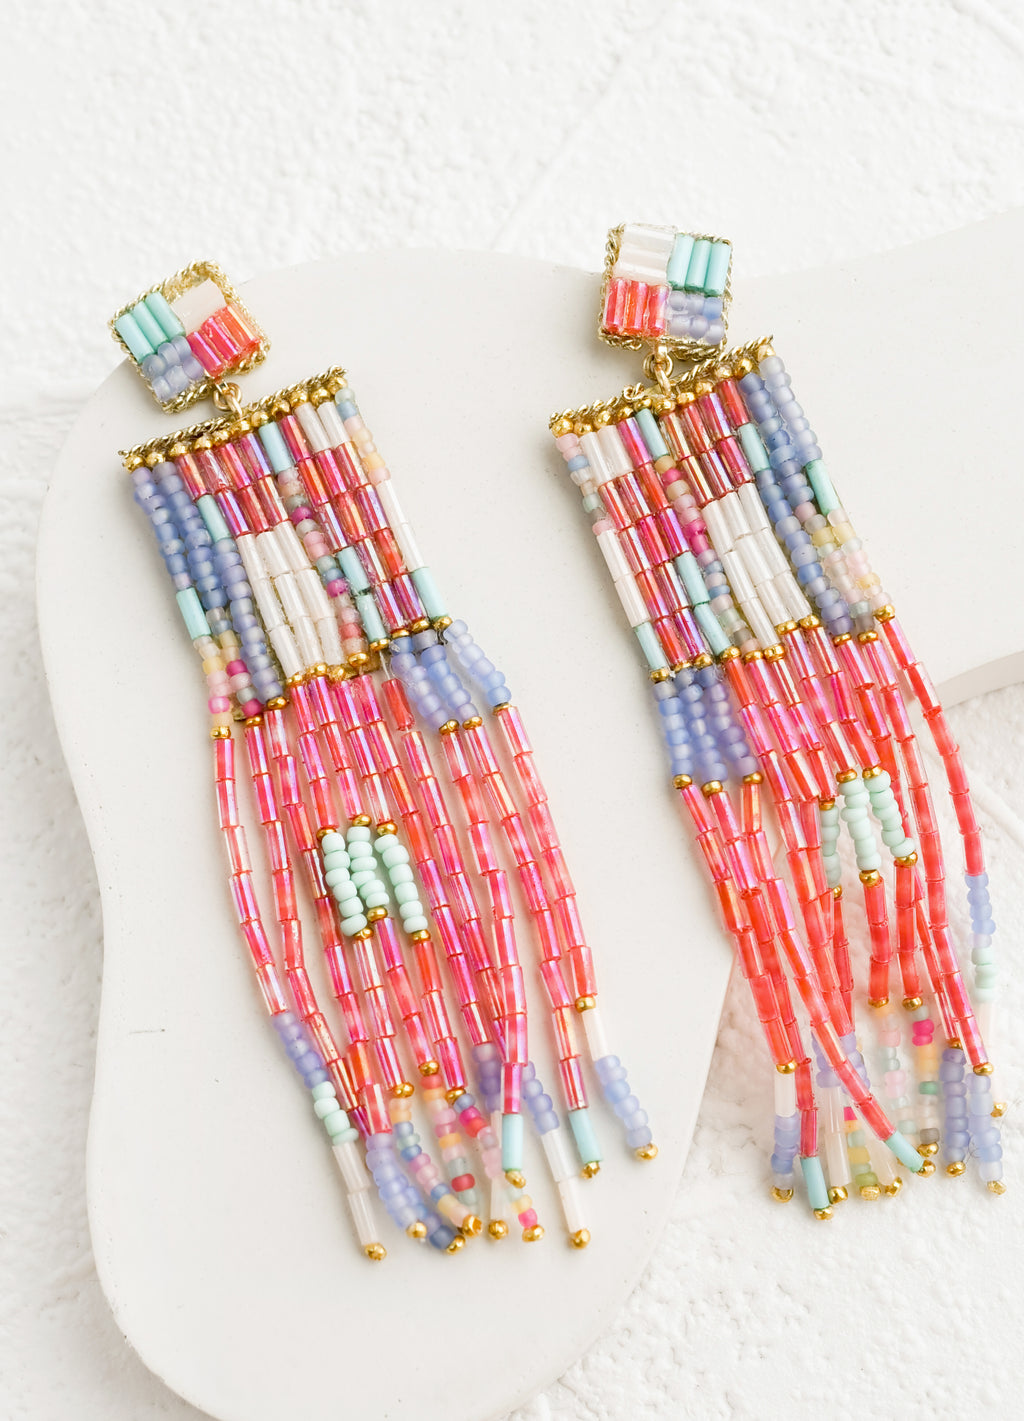 Pink Multi: A pair of long beaded earrings in metallic pink, lilac, white and aqua.